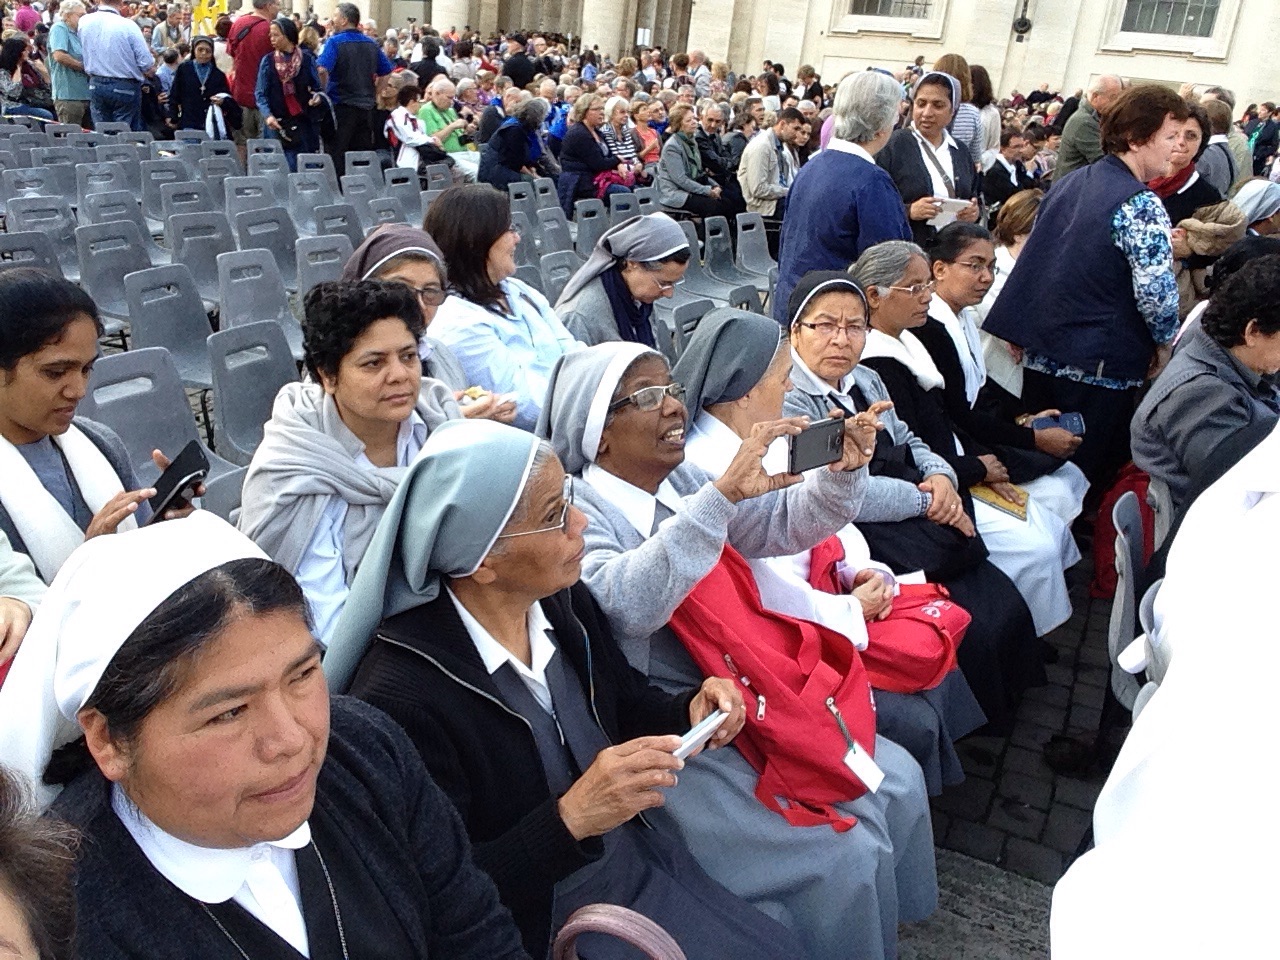 GENERAL CONFERENCE, ROME 1th-15th October 2015